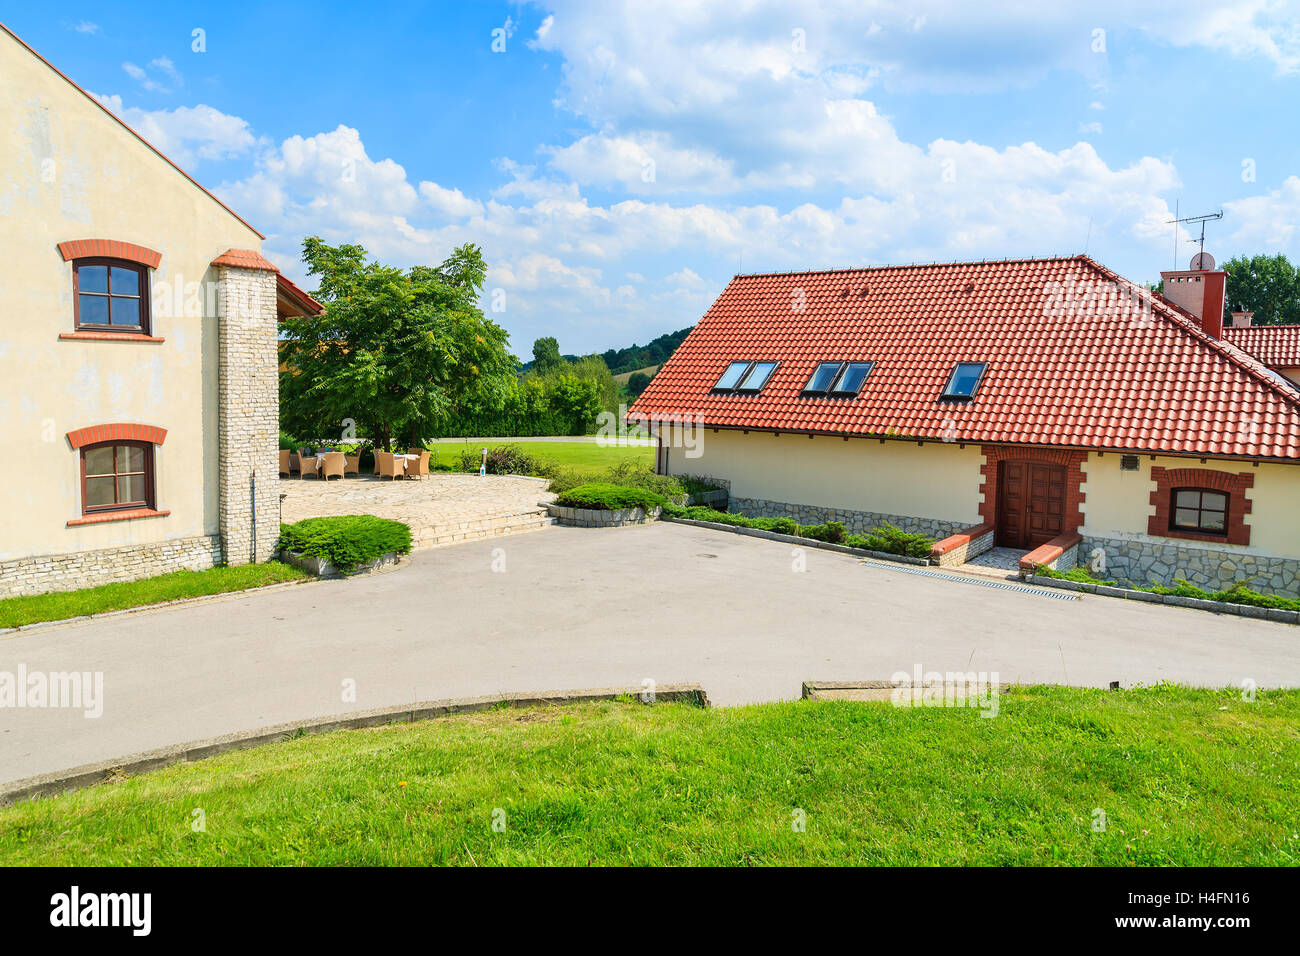 Restaurant building with chairs and tables on sunny terrace in Paczultowice village, Poland Stock Photo